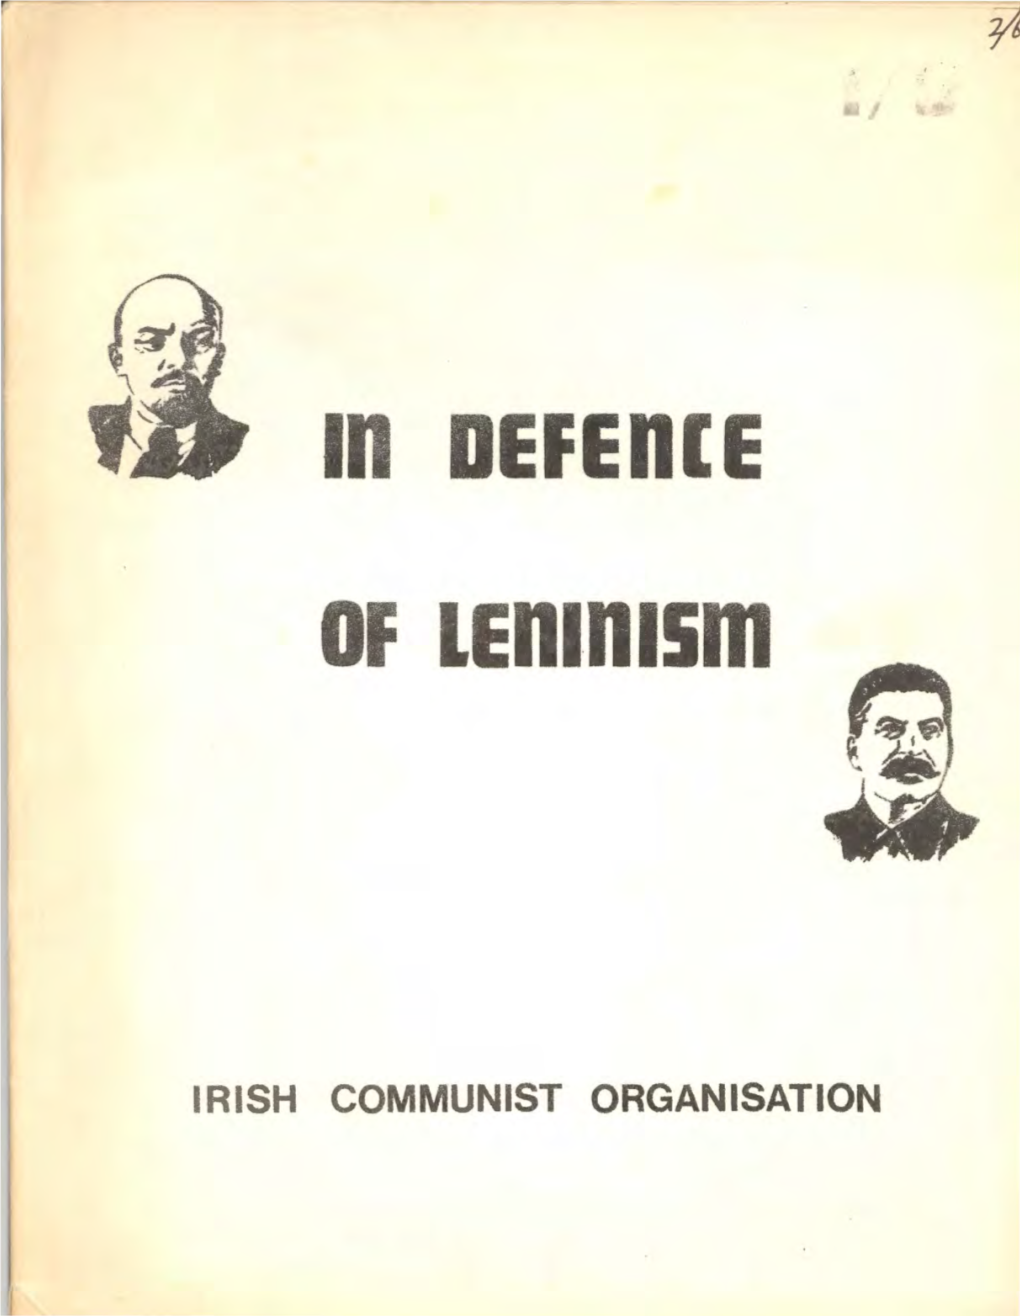 In Defense of Leninism